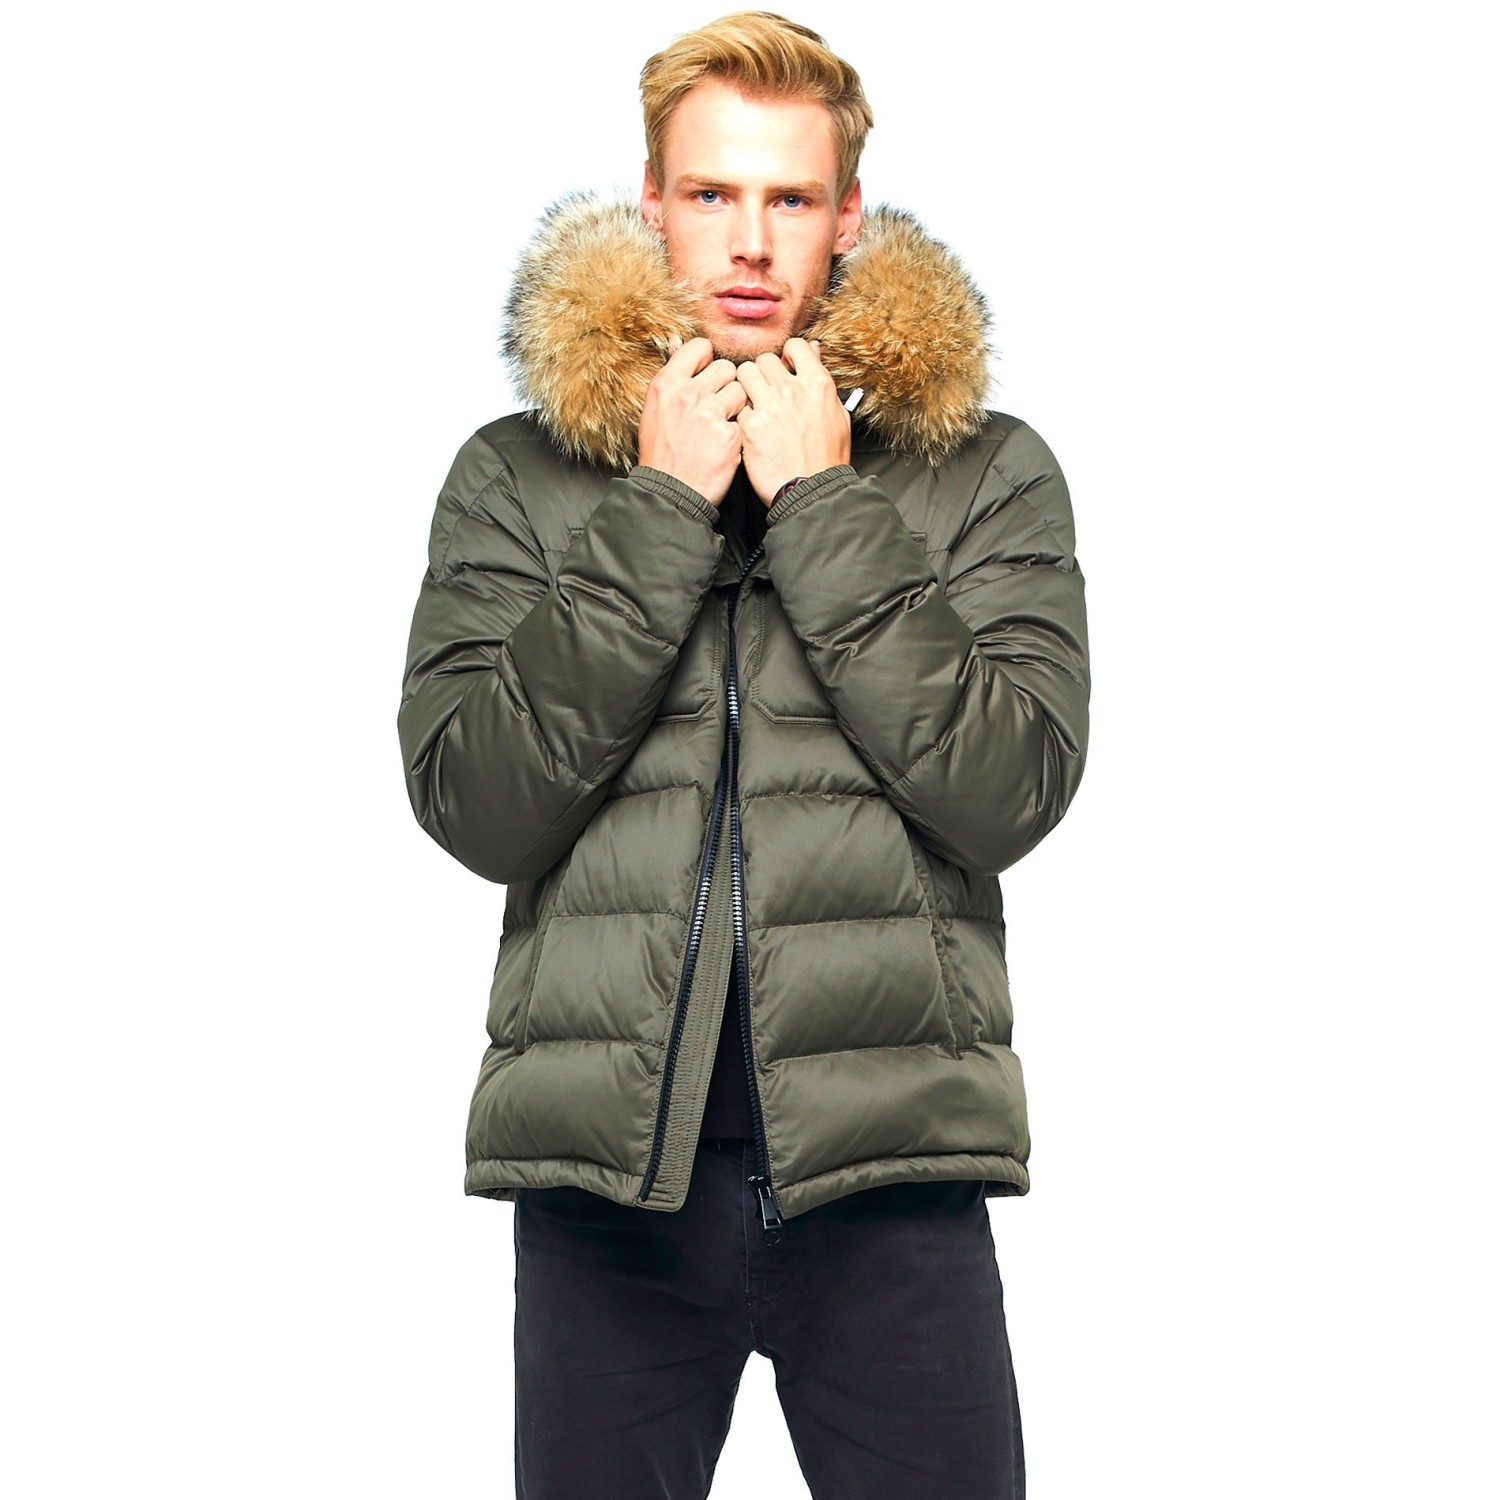 LEOCLOTHO Mens Hoodie Cotton Padded Coat Winter Thicken Jacket Outerwear Fashion Faux Fur Collar